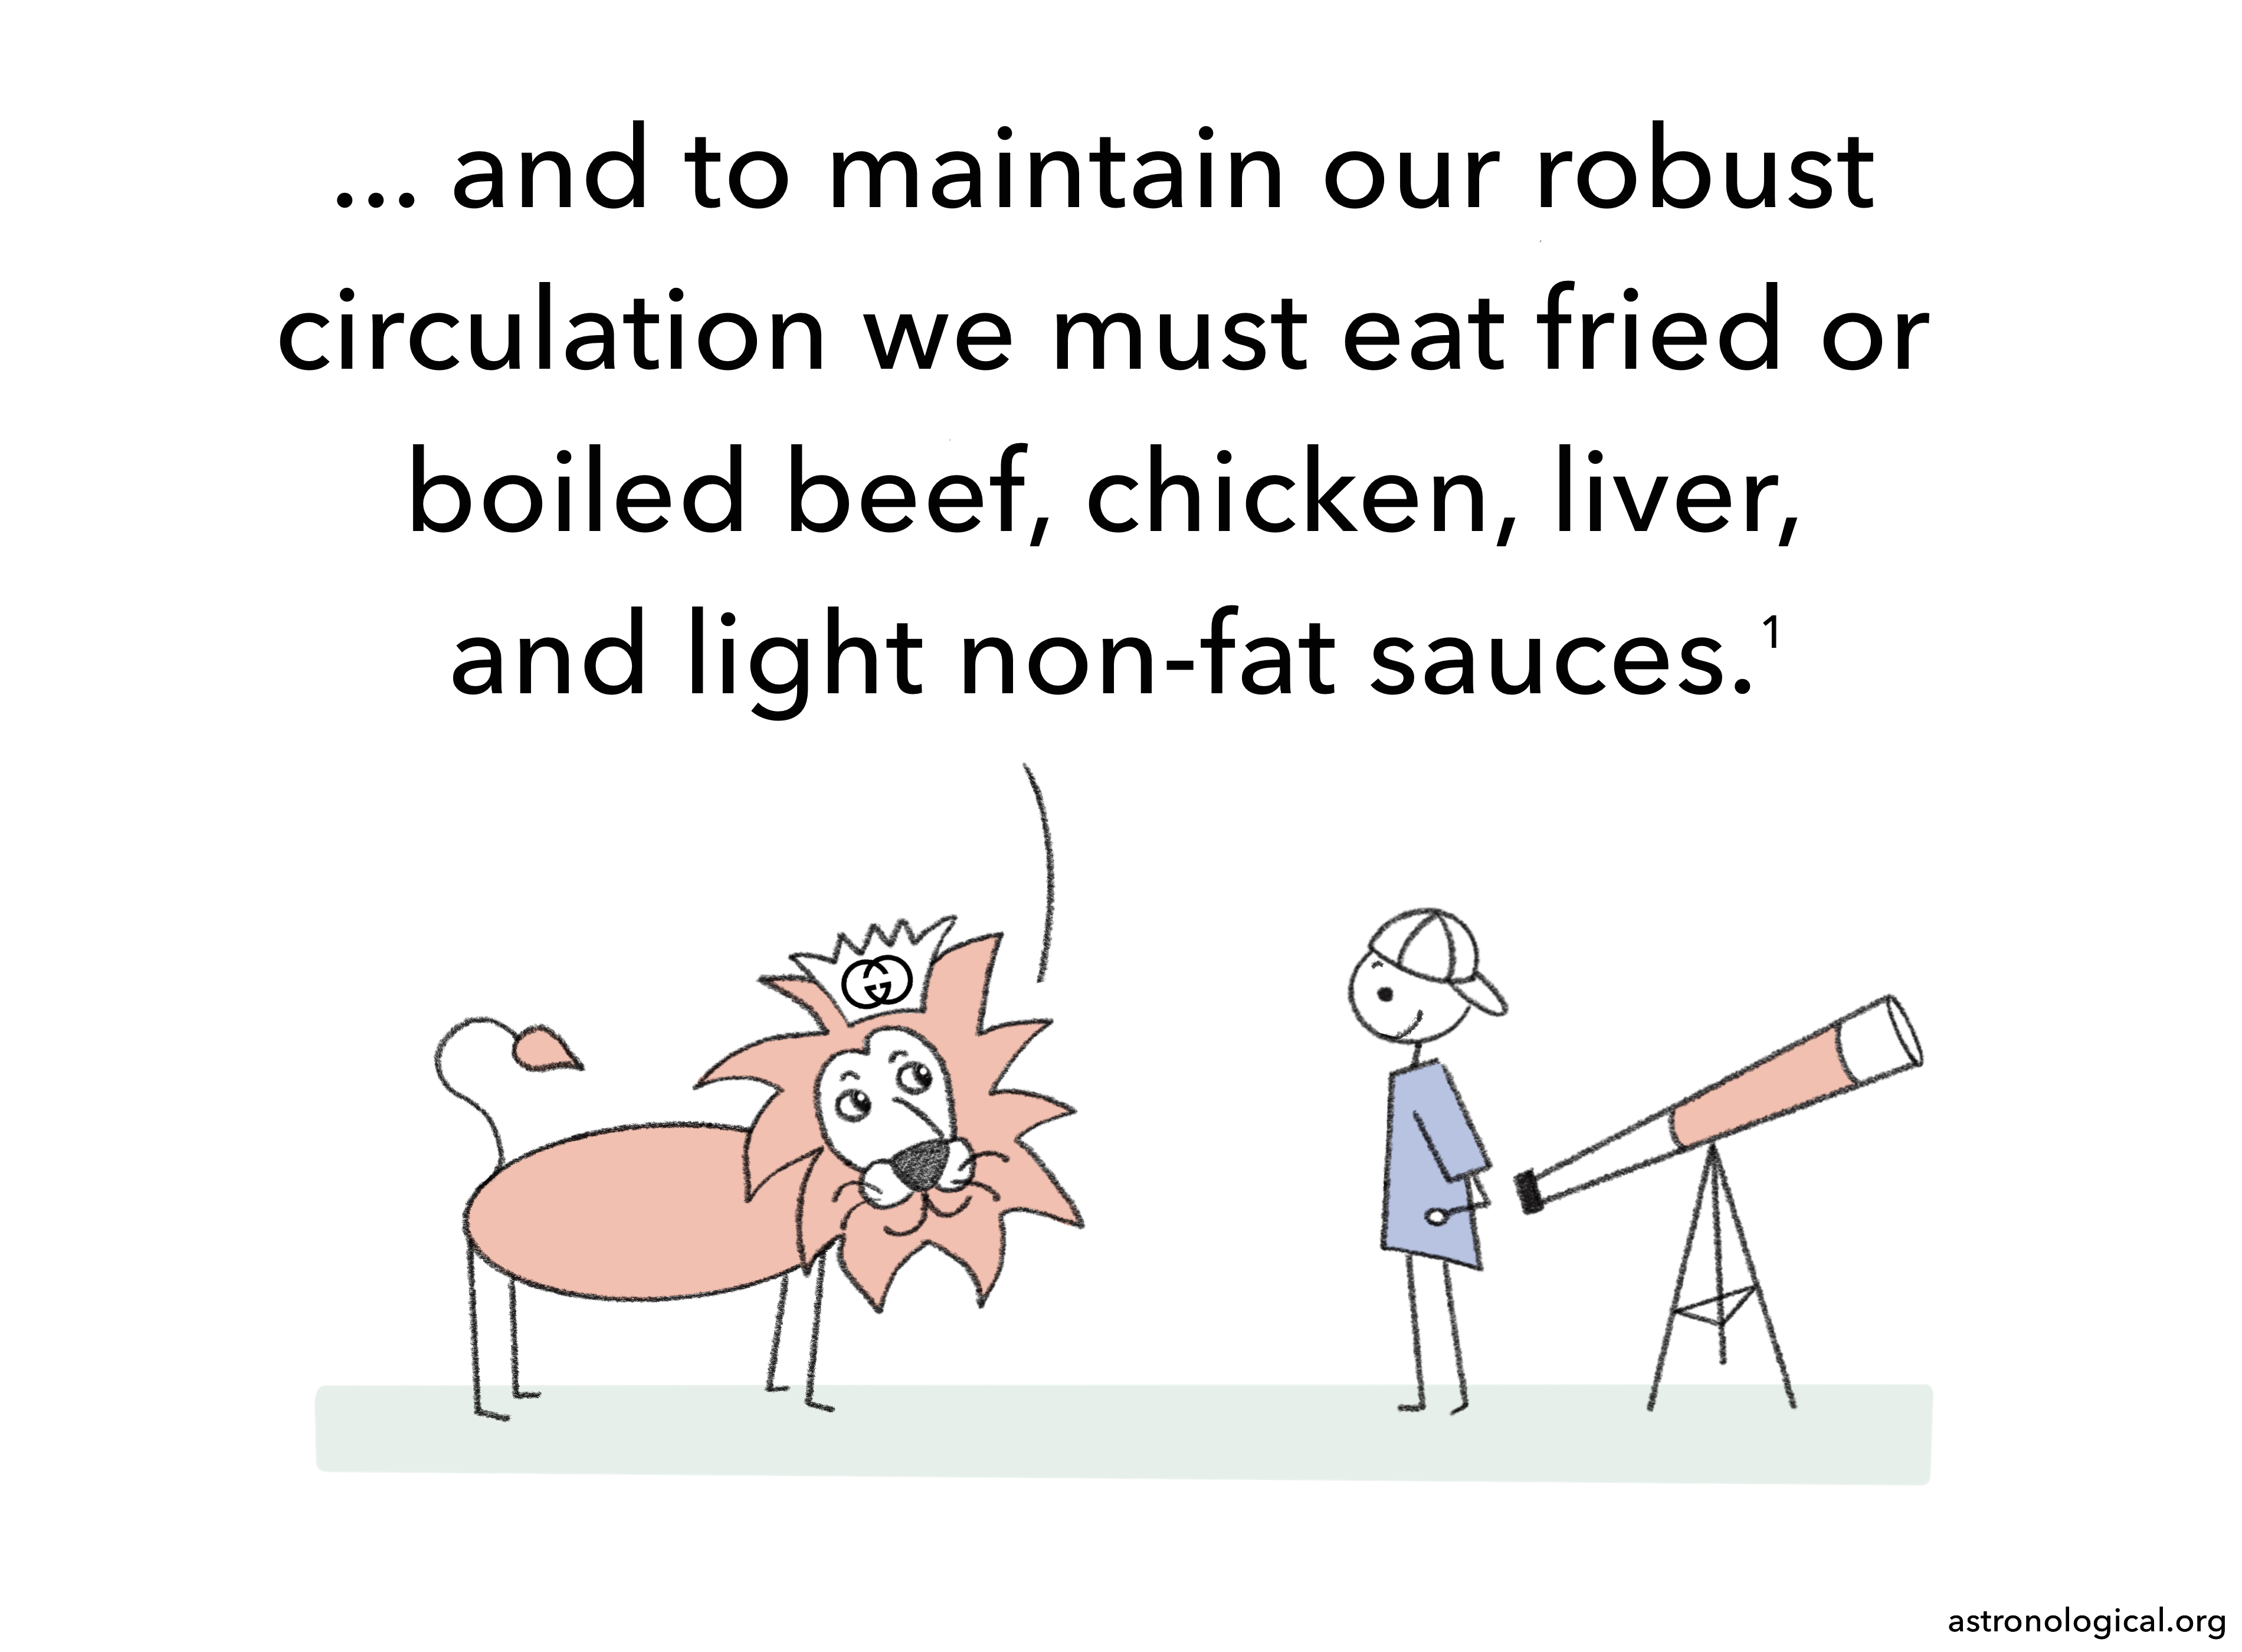 The lion continues: ... and to maintain our robust circulation we must eat fried or boiled beef, chicken, liver, and light non-fat sauces. The scientist looks amused.